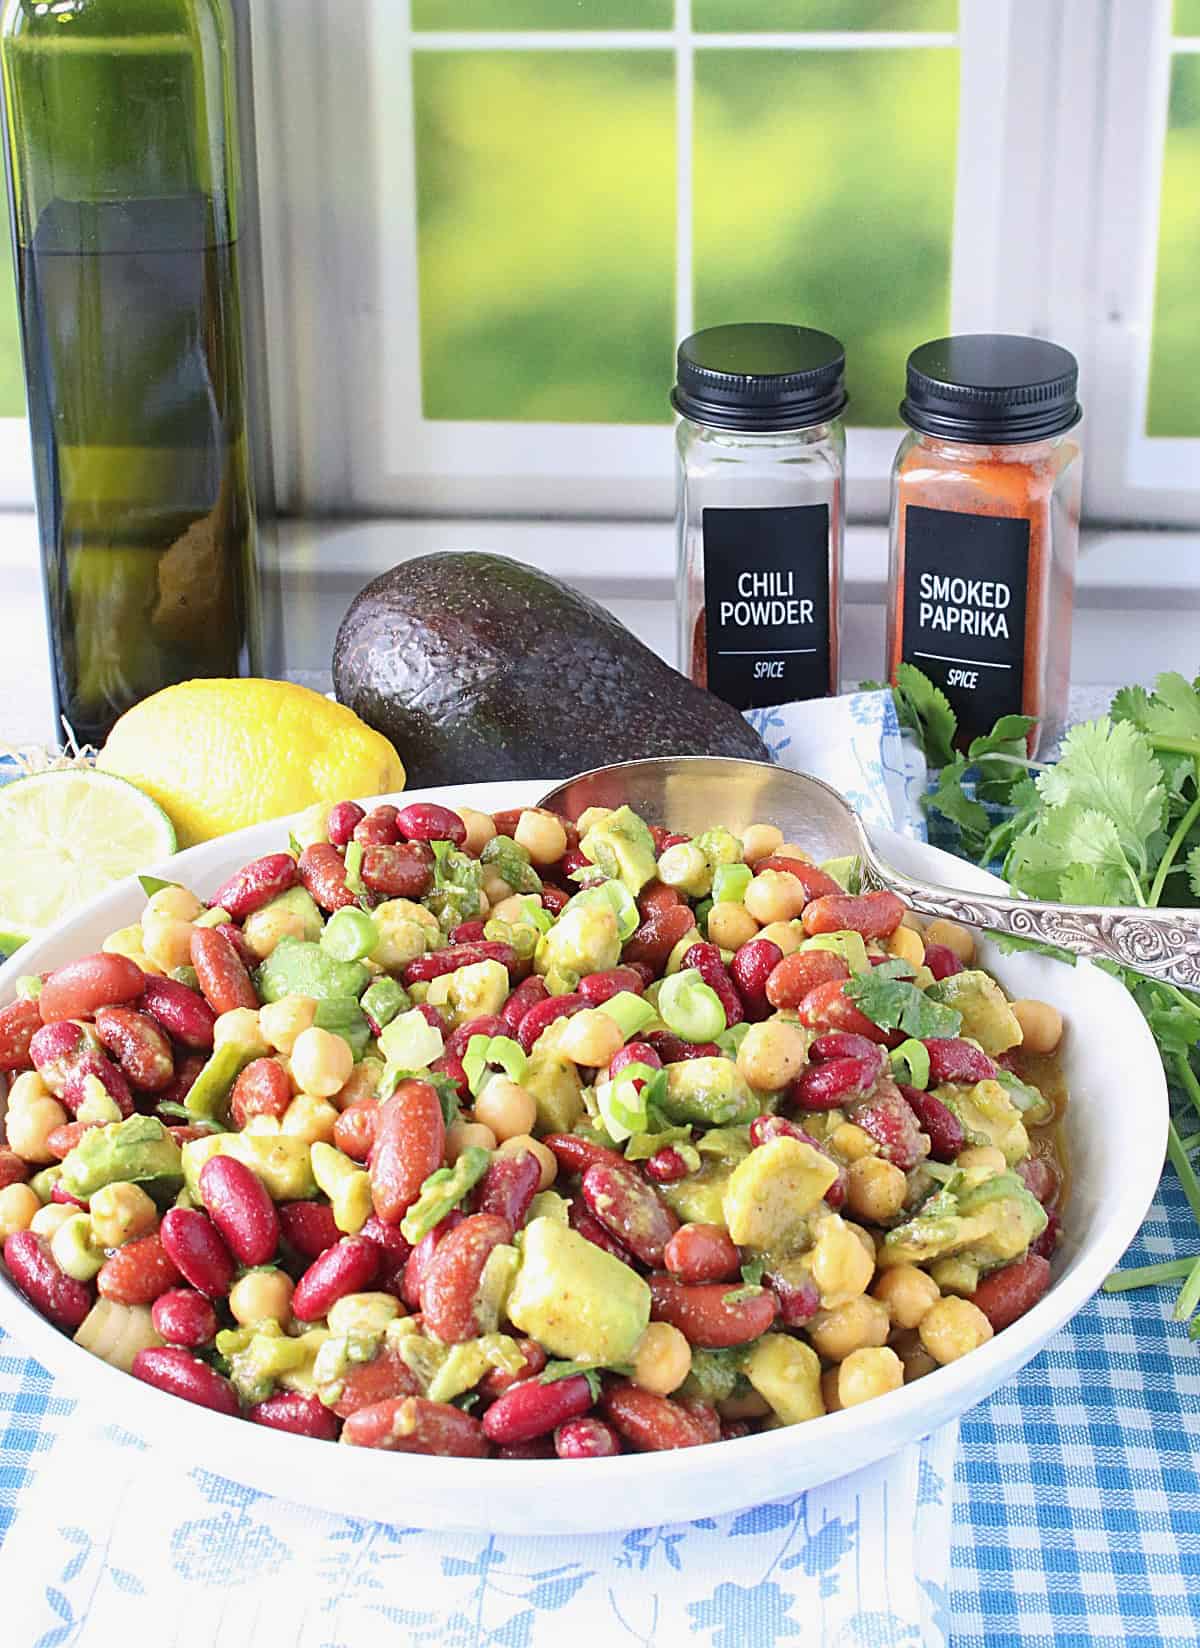 A white bowl filled with a colorful avocado and red kidney bean salad by a window.